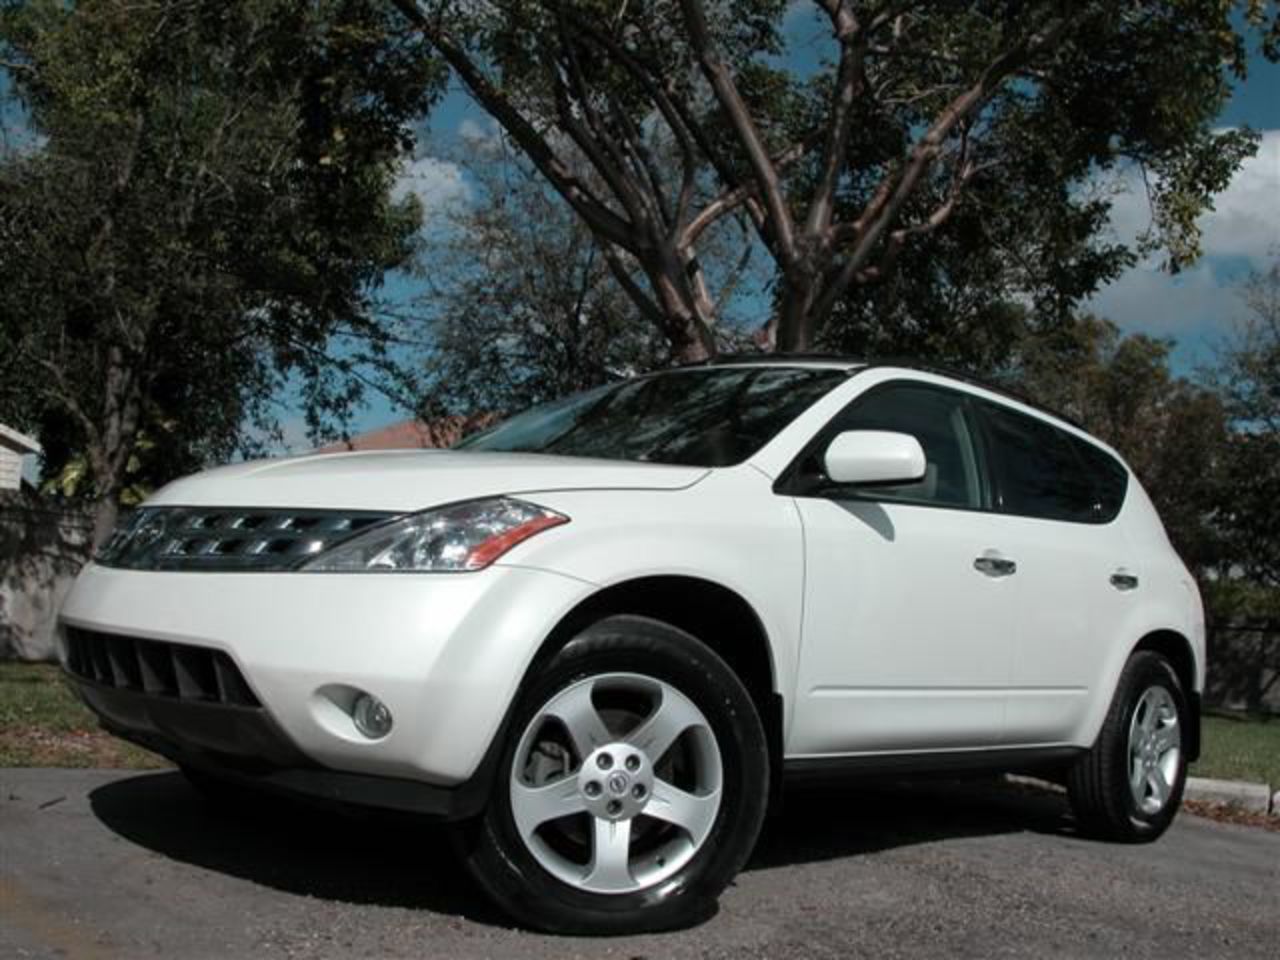 Nissan Murano SE. View Download Wallpaper. 640x480. Comments